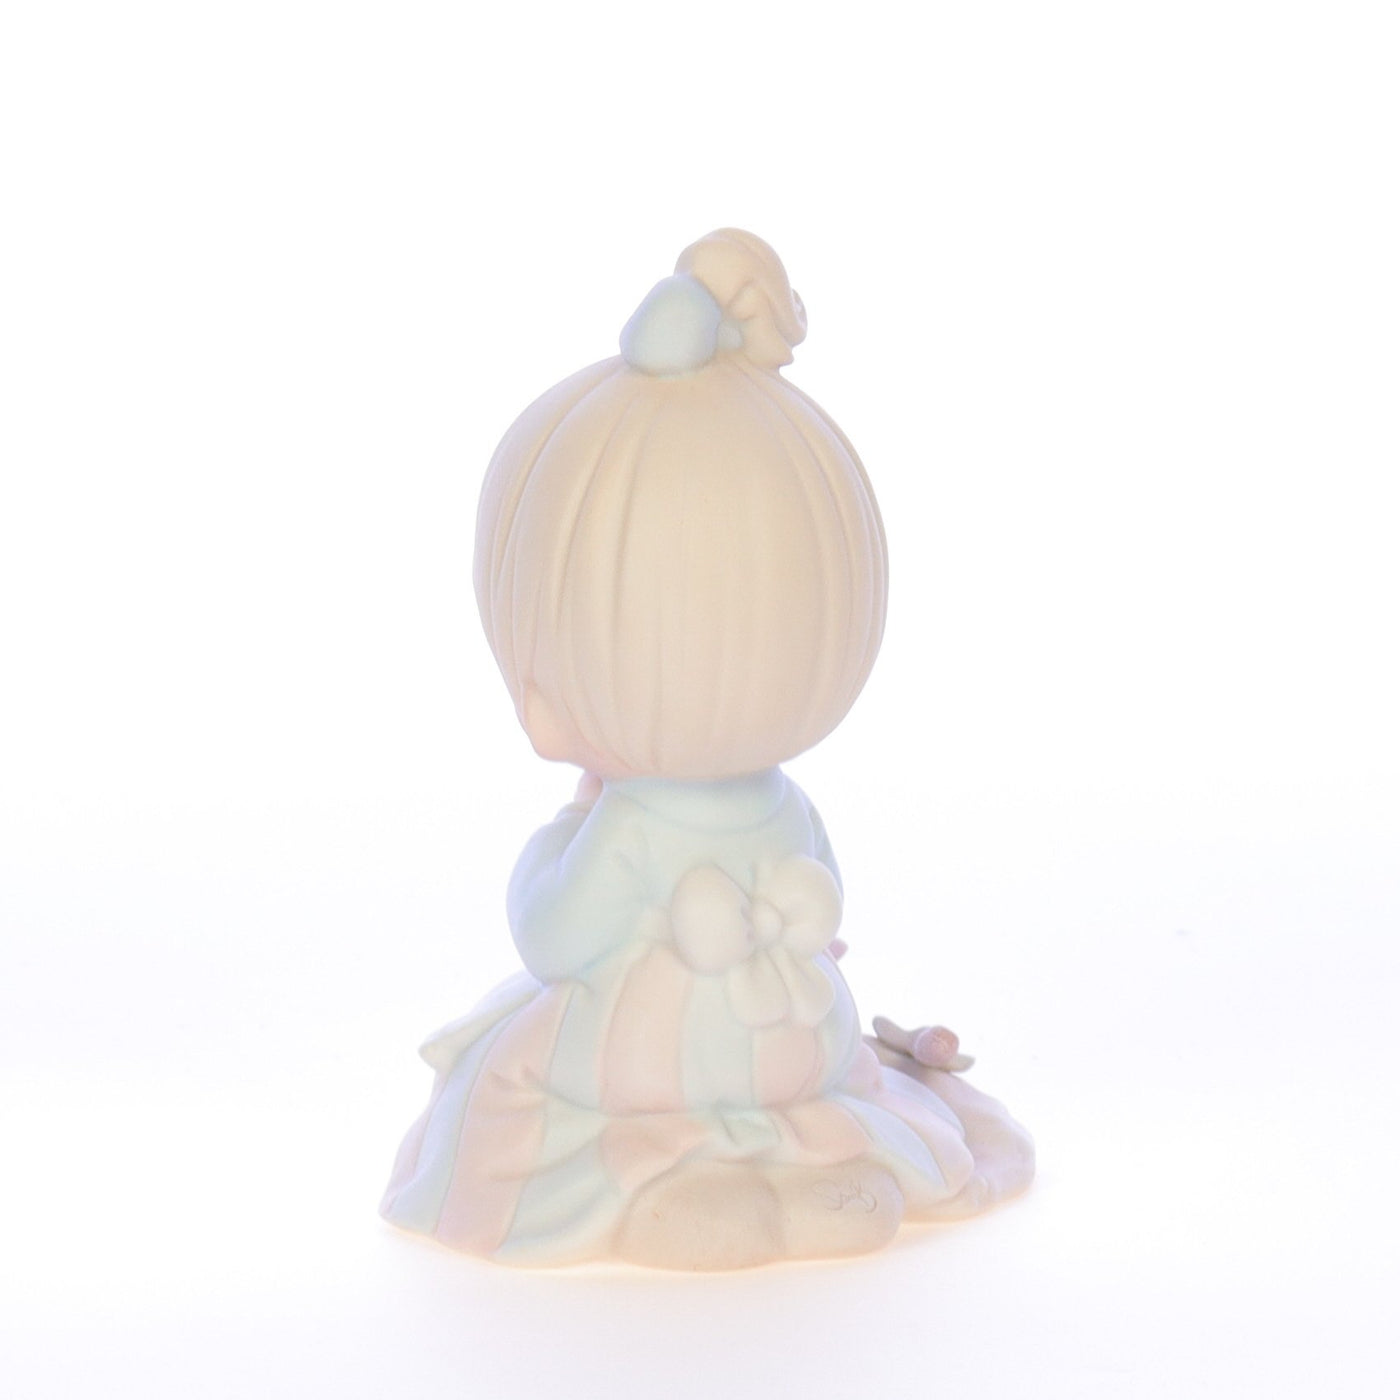 Precious_Moments_Porcelain_Figurine_Sowing_the_Seeds_of_Love_PM922_04.jpg